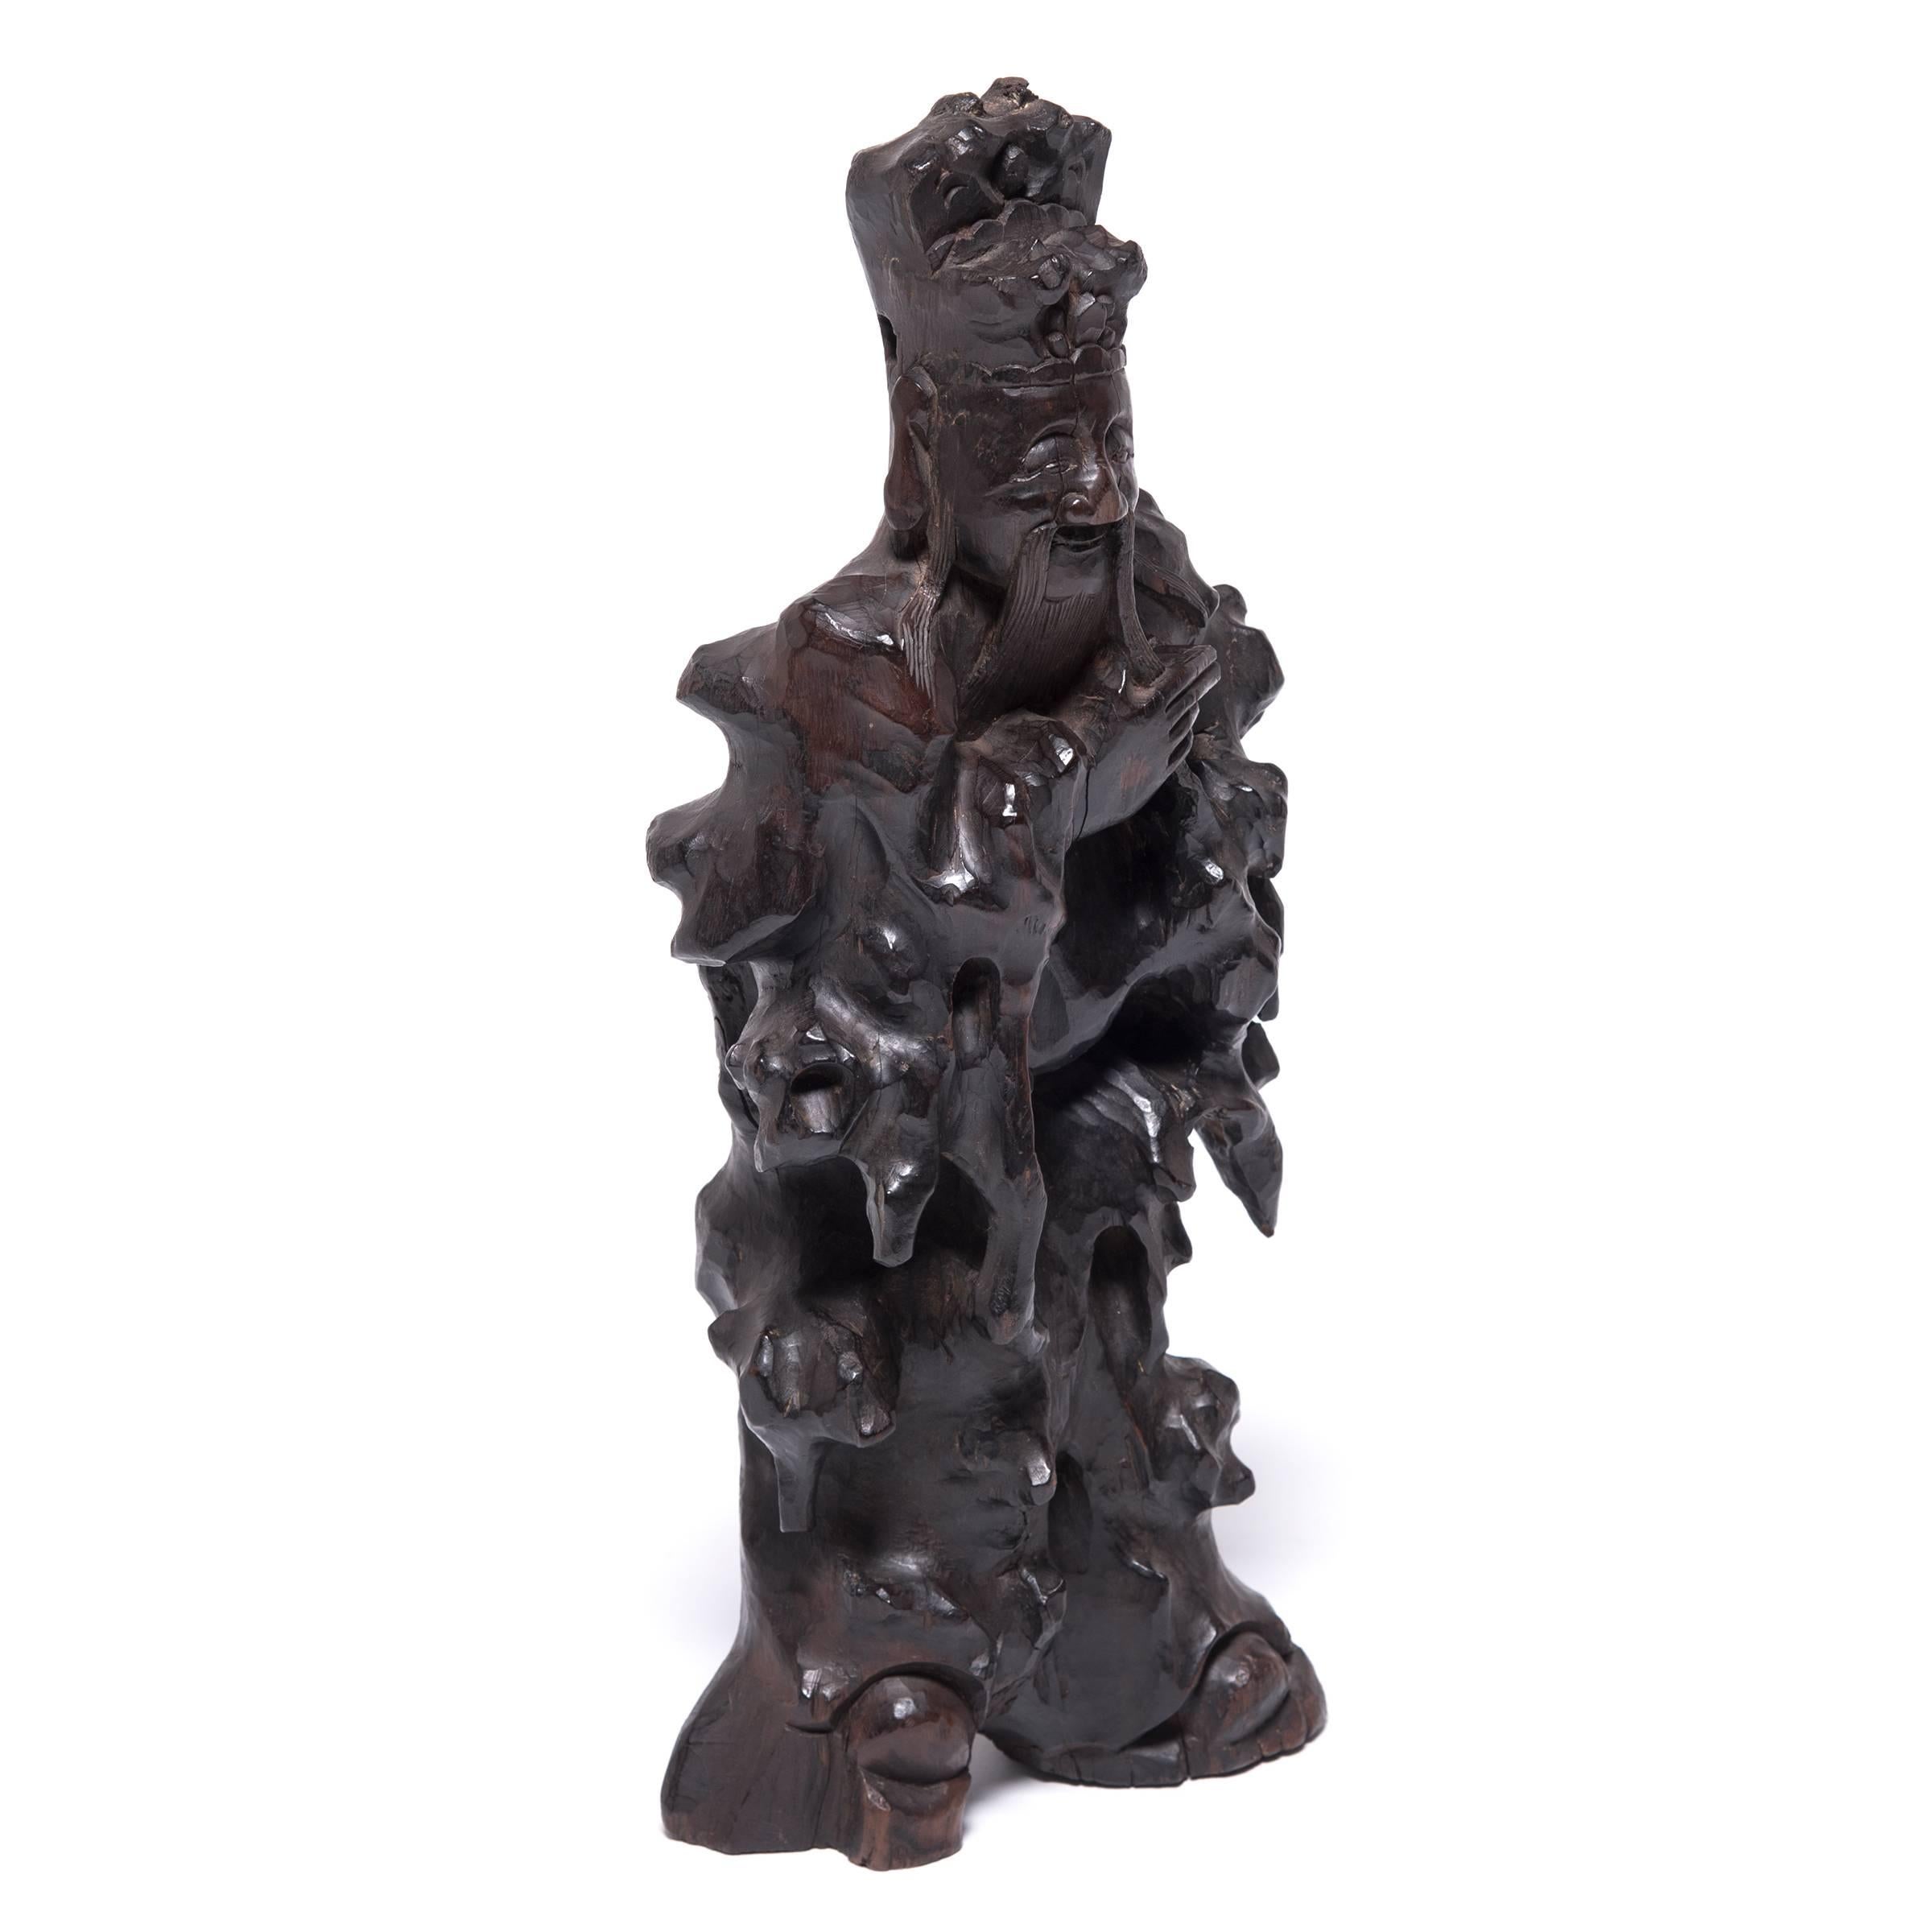 Scholars in China's Qing dynasty often turned to the natural world as inspiration for their musings. These influences are apparent in the brushes, tables, pictures, and inkstones they surrounded themselves with. Root sculptures like this figure are